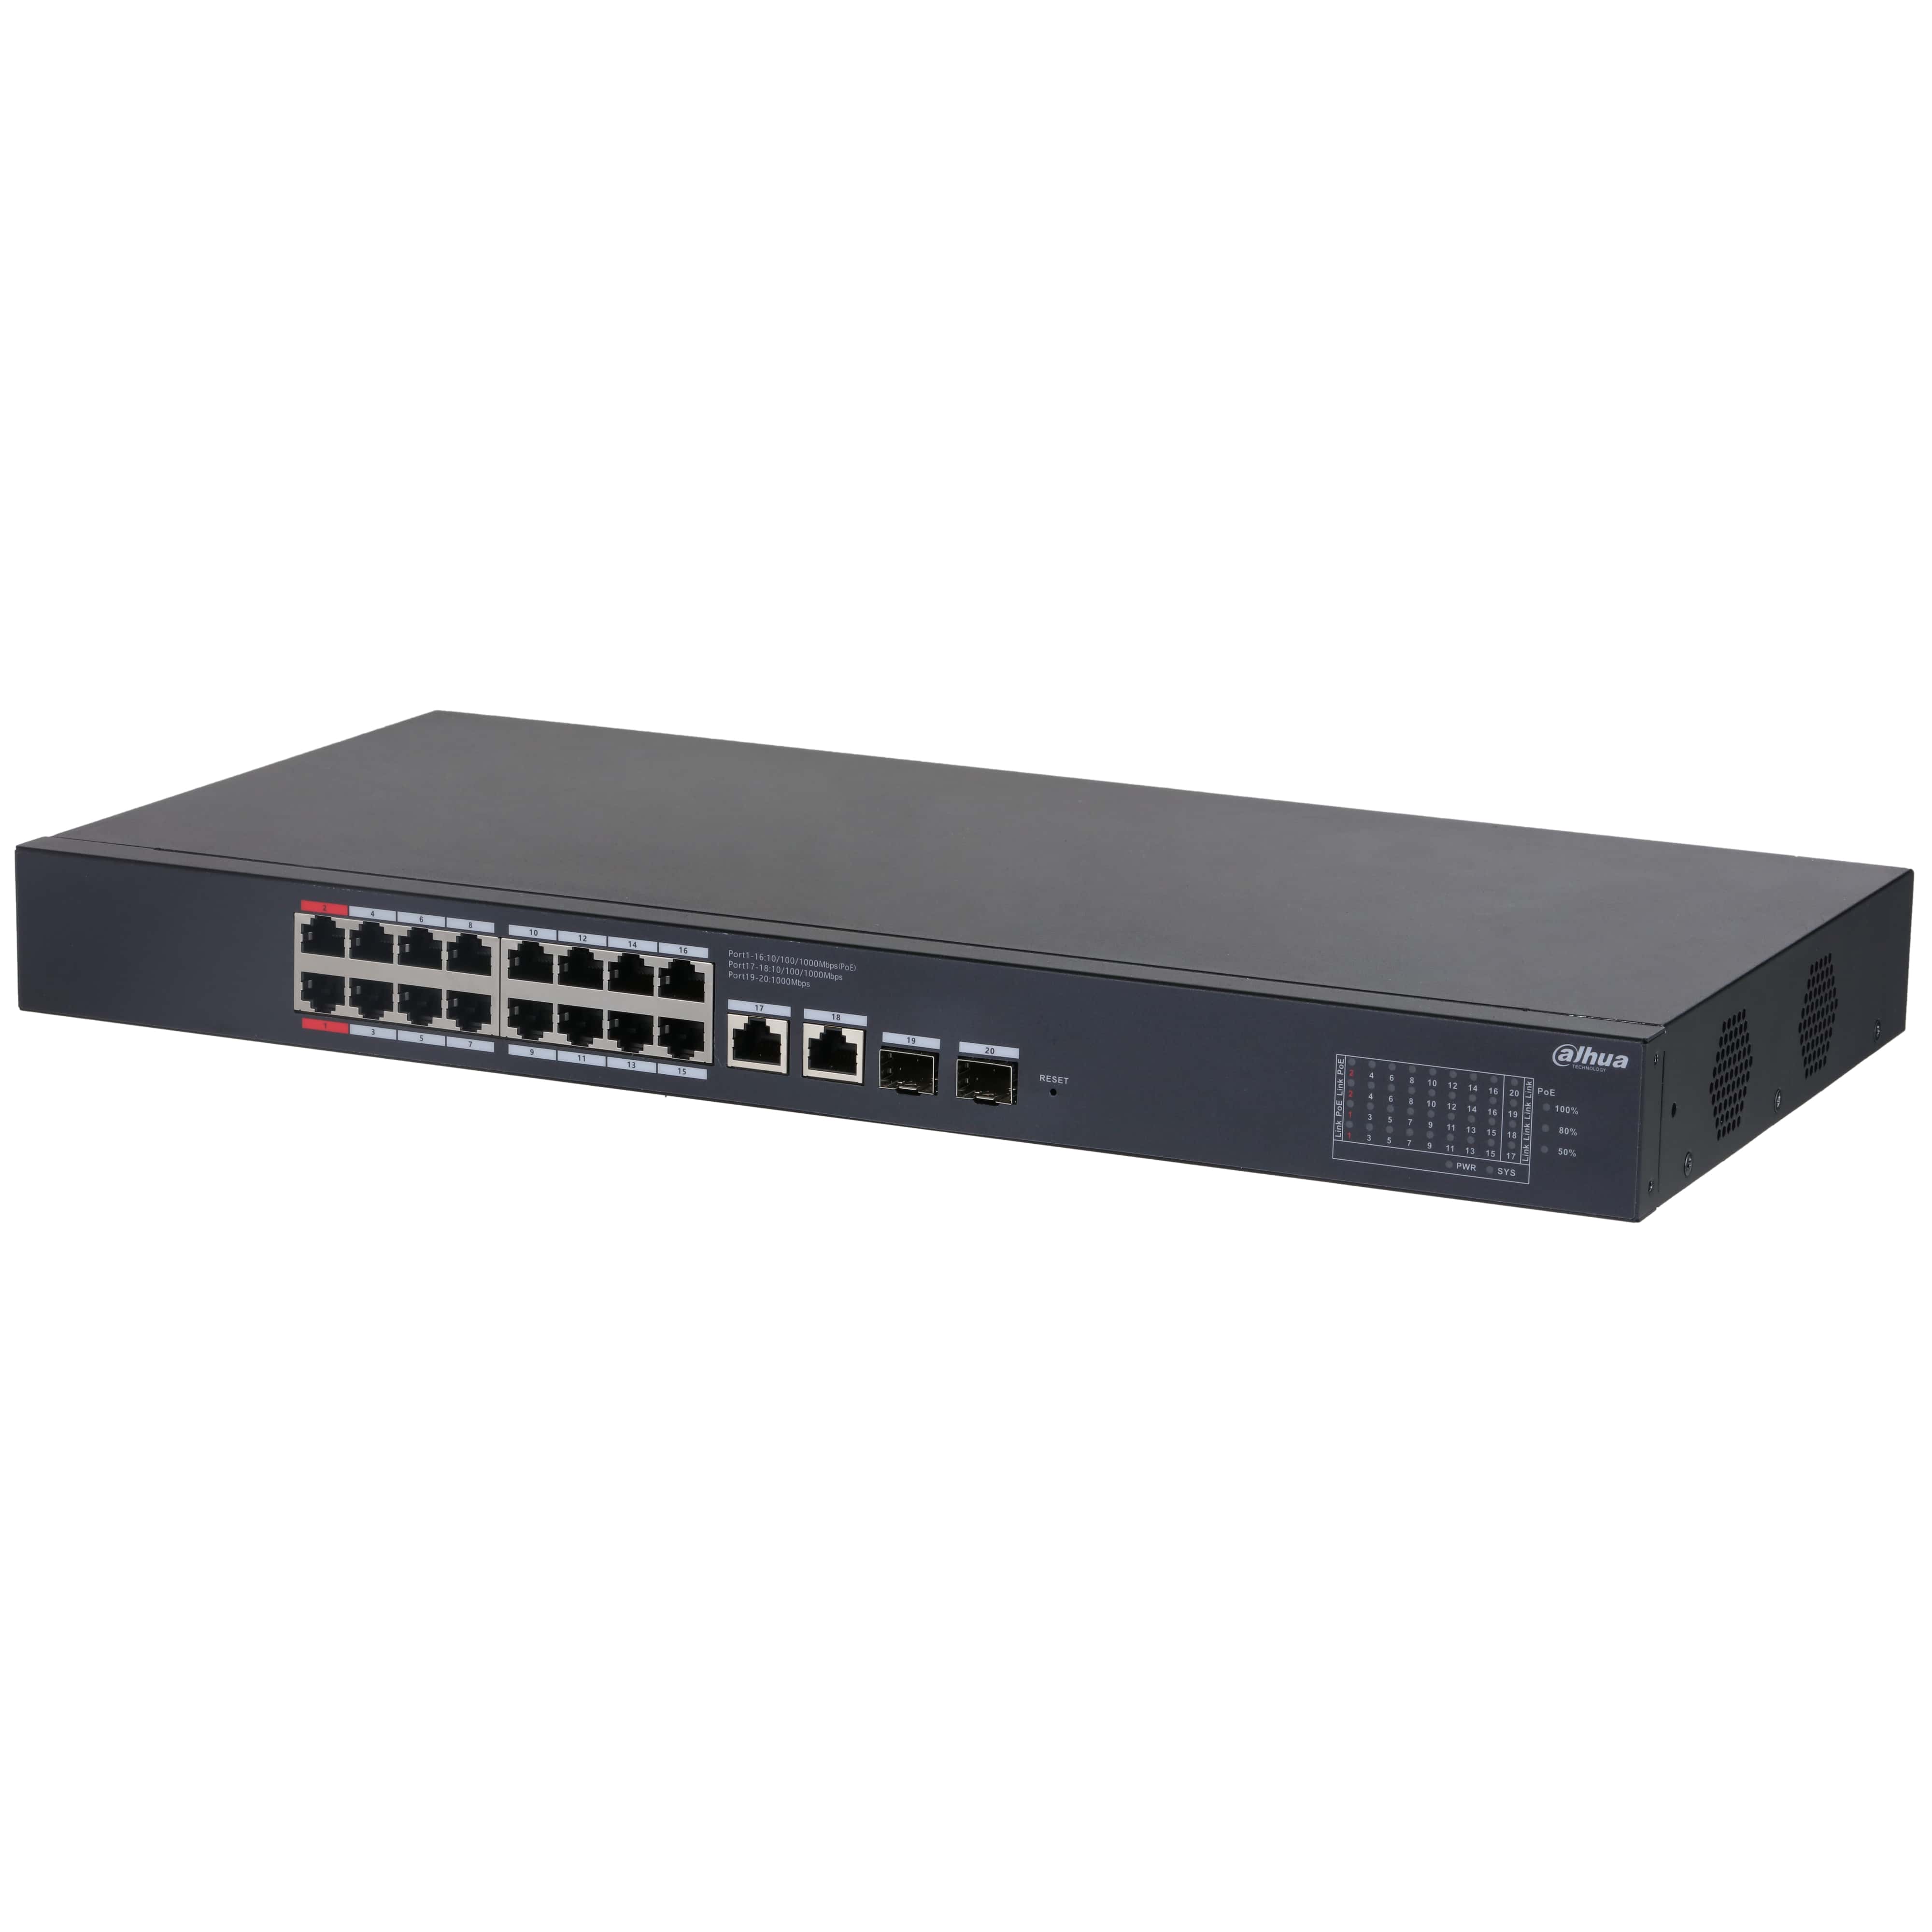 DAHUA- CS4220-16GT-240 - Switch manageable - 20 canaux - 16 ports POE